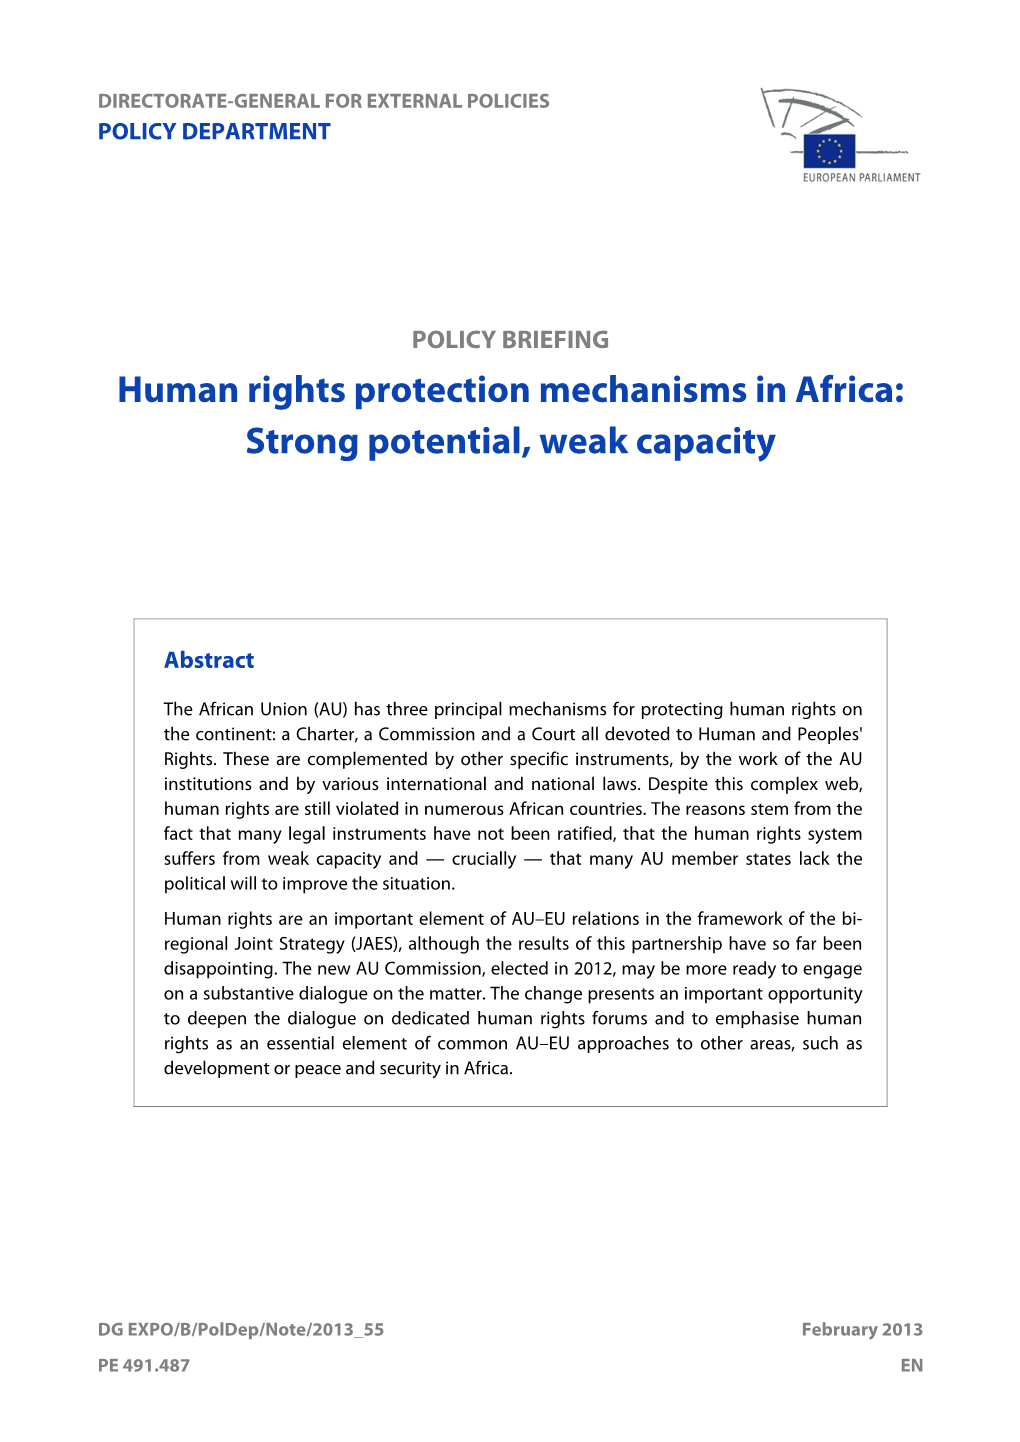 Human Rights Protection Mechanisms in Africa: Strong Potential, Weak Capacity